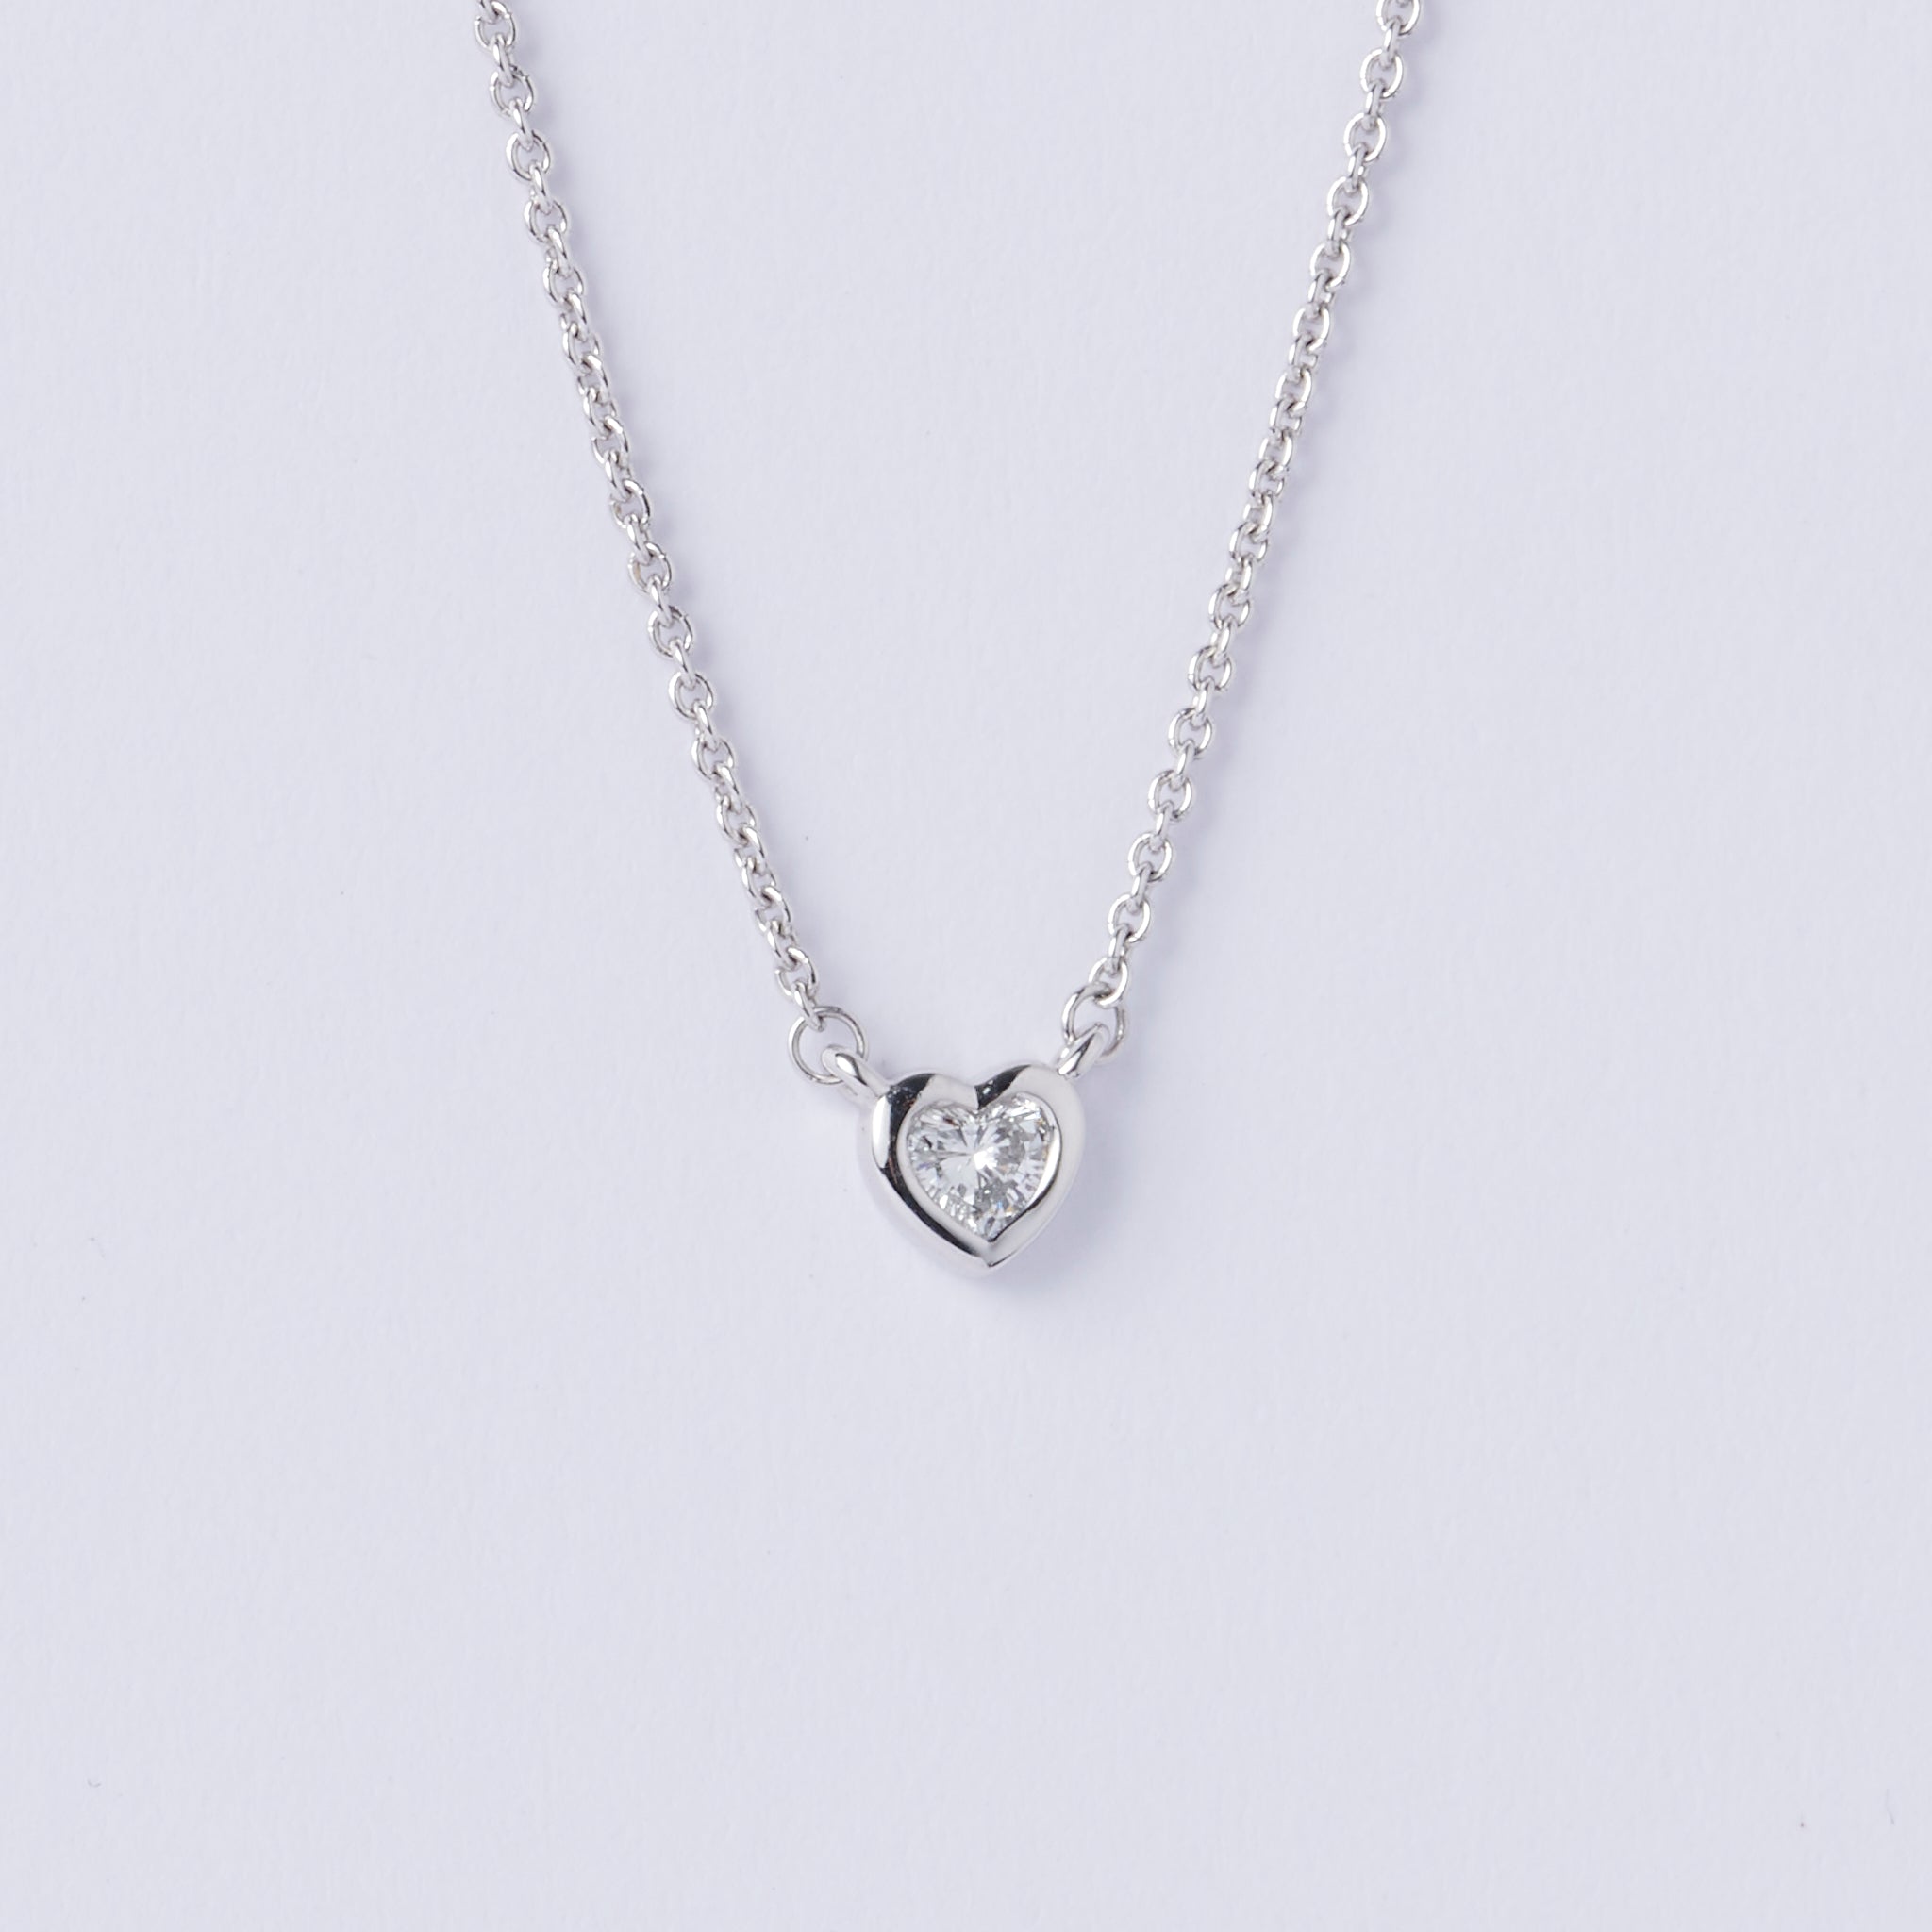 Buy 14K Solid Gold Diamond Heart Necklace, Dainty Diamond Heart Necklace, Floating  Diamond Open Heart Necklace, Gift for Her Online in India - Etsy